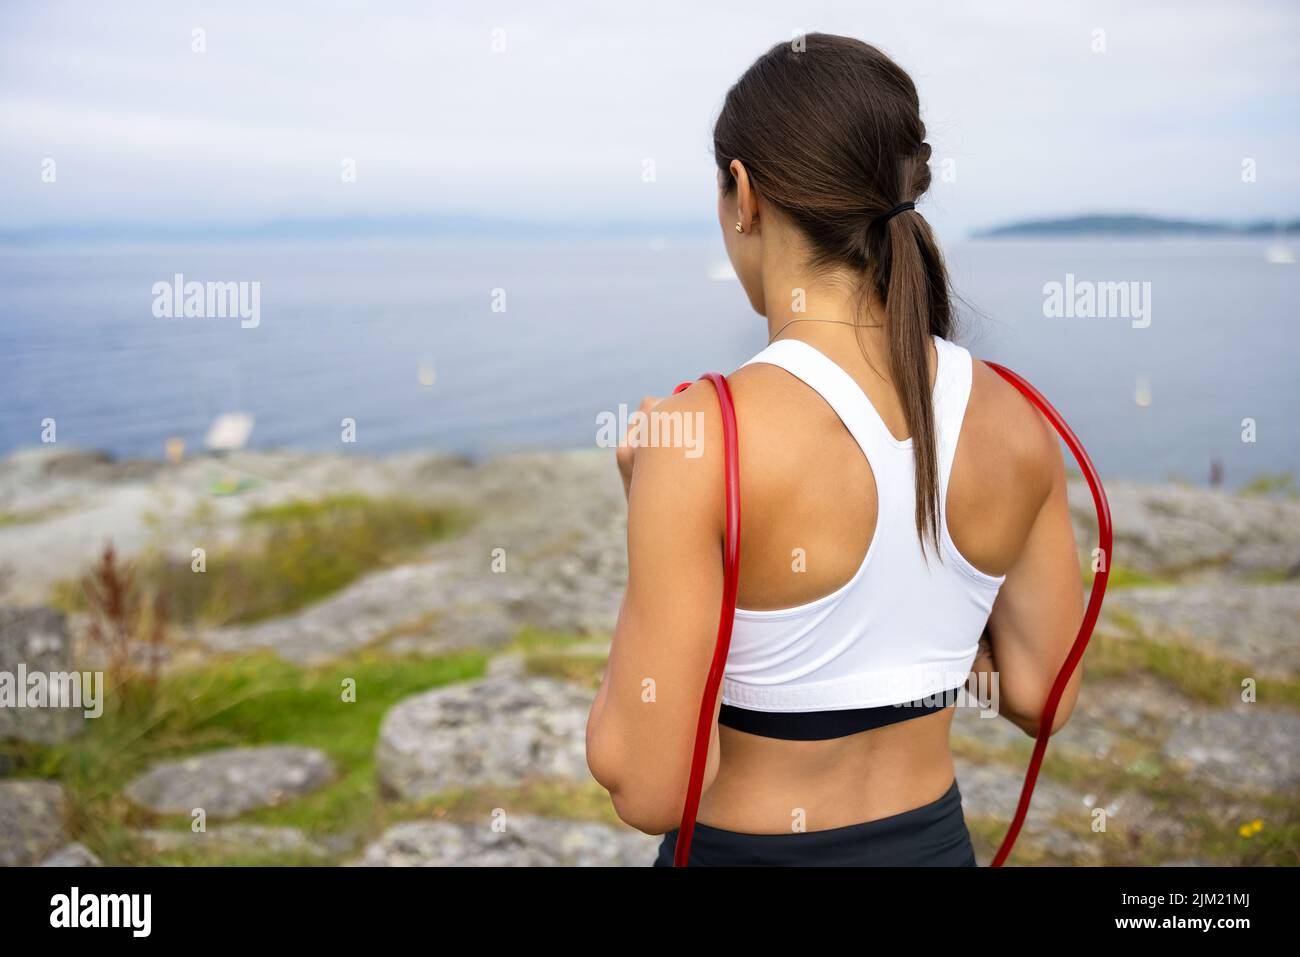 Athlete Doing Outdoor Workout With Jumping Rope Stock Photo